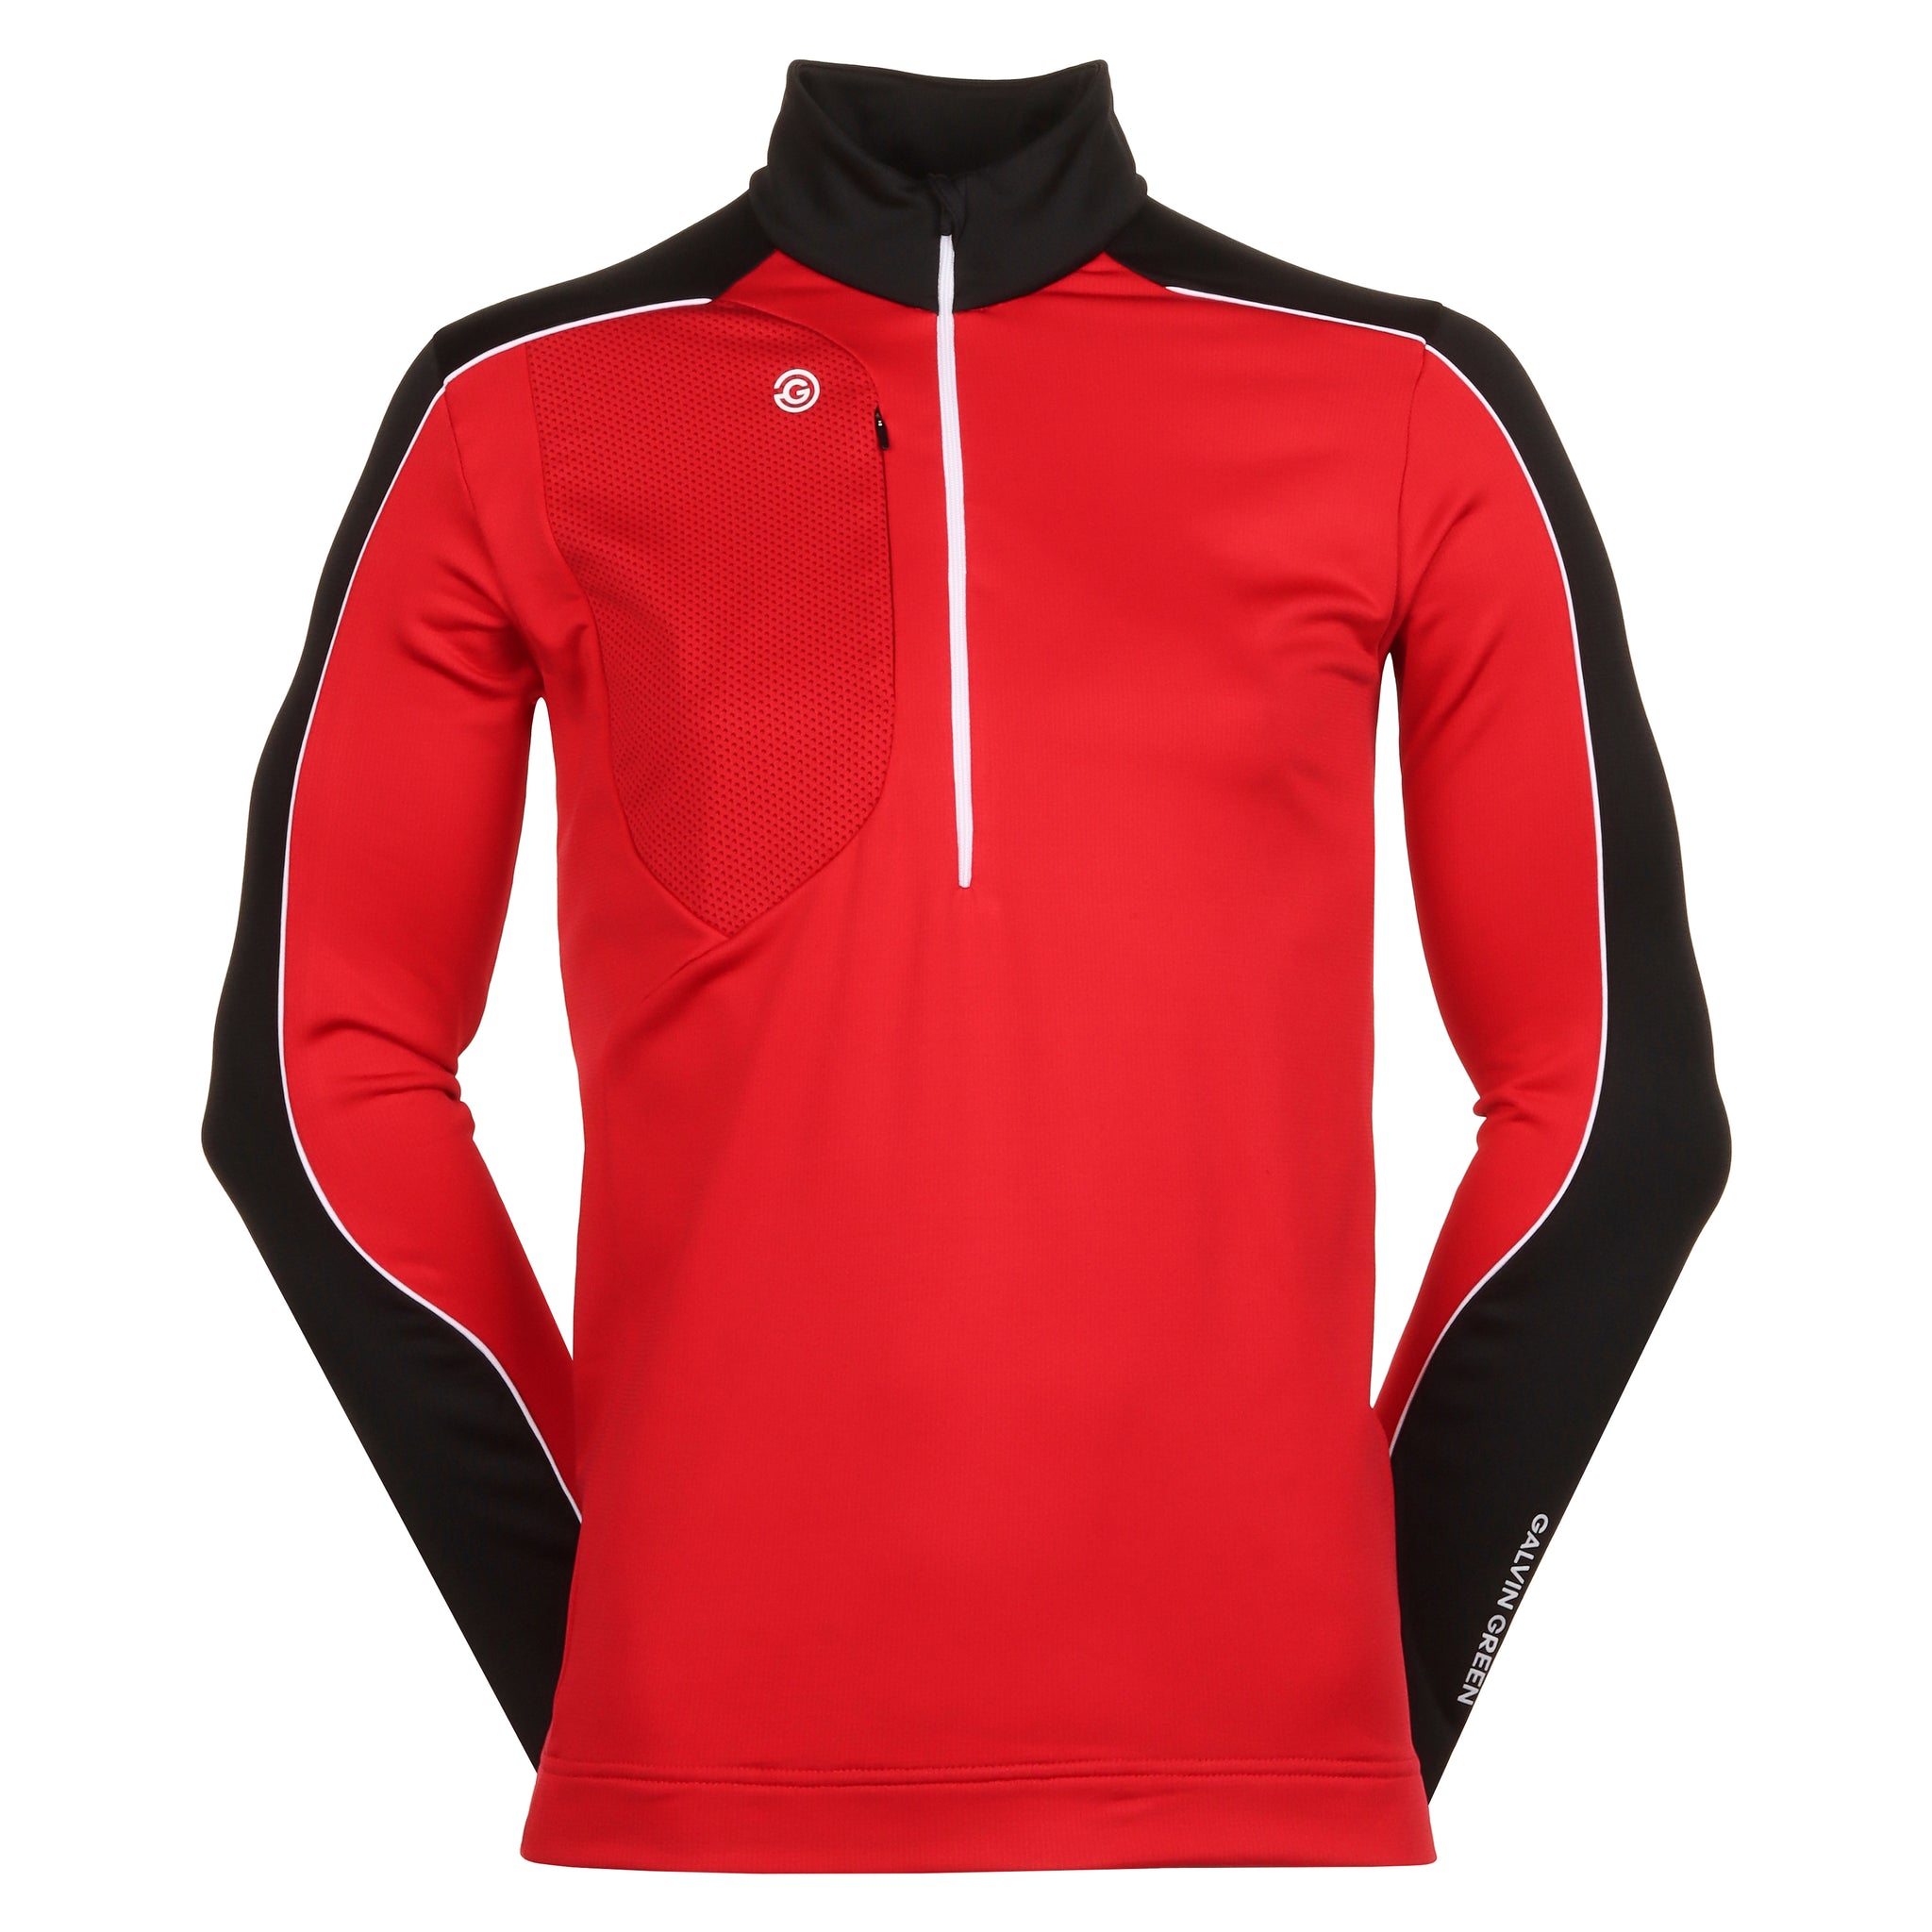 galvin-green-dave-insula-golf-pullover-red-black-9785